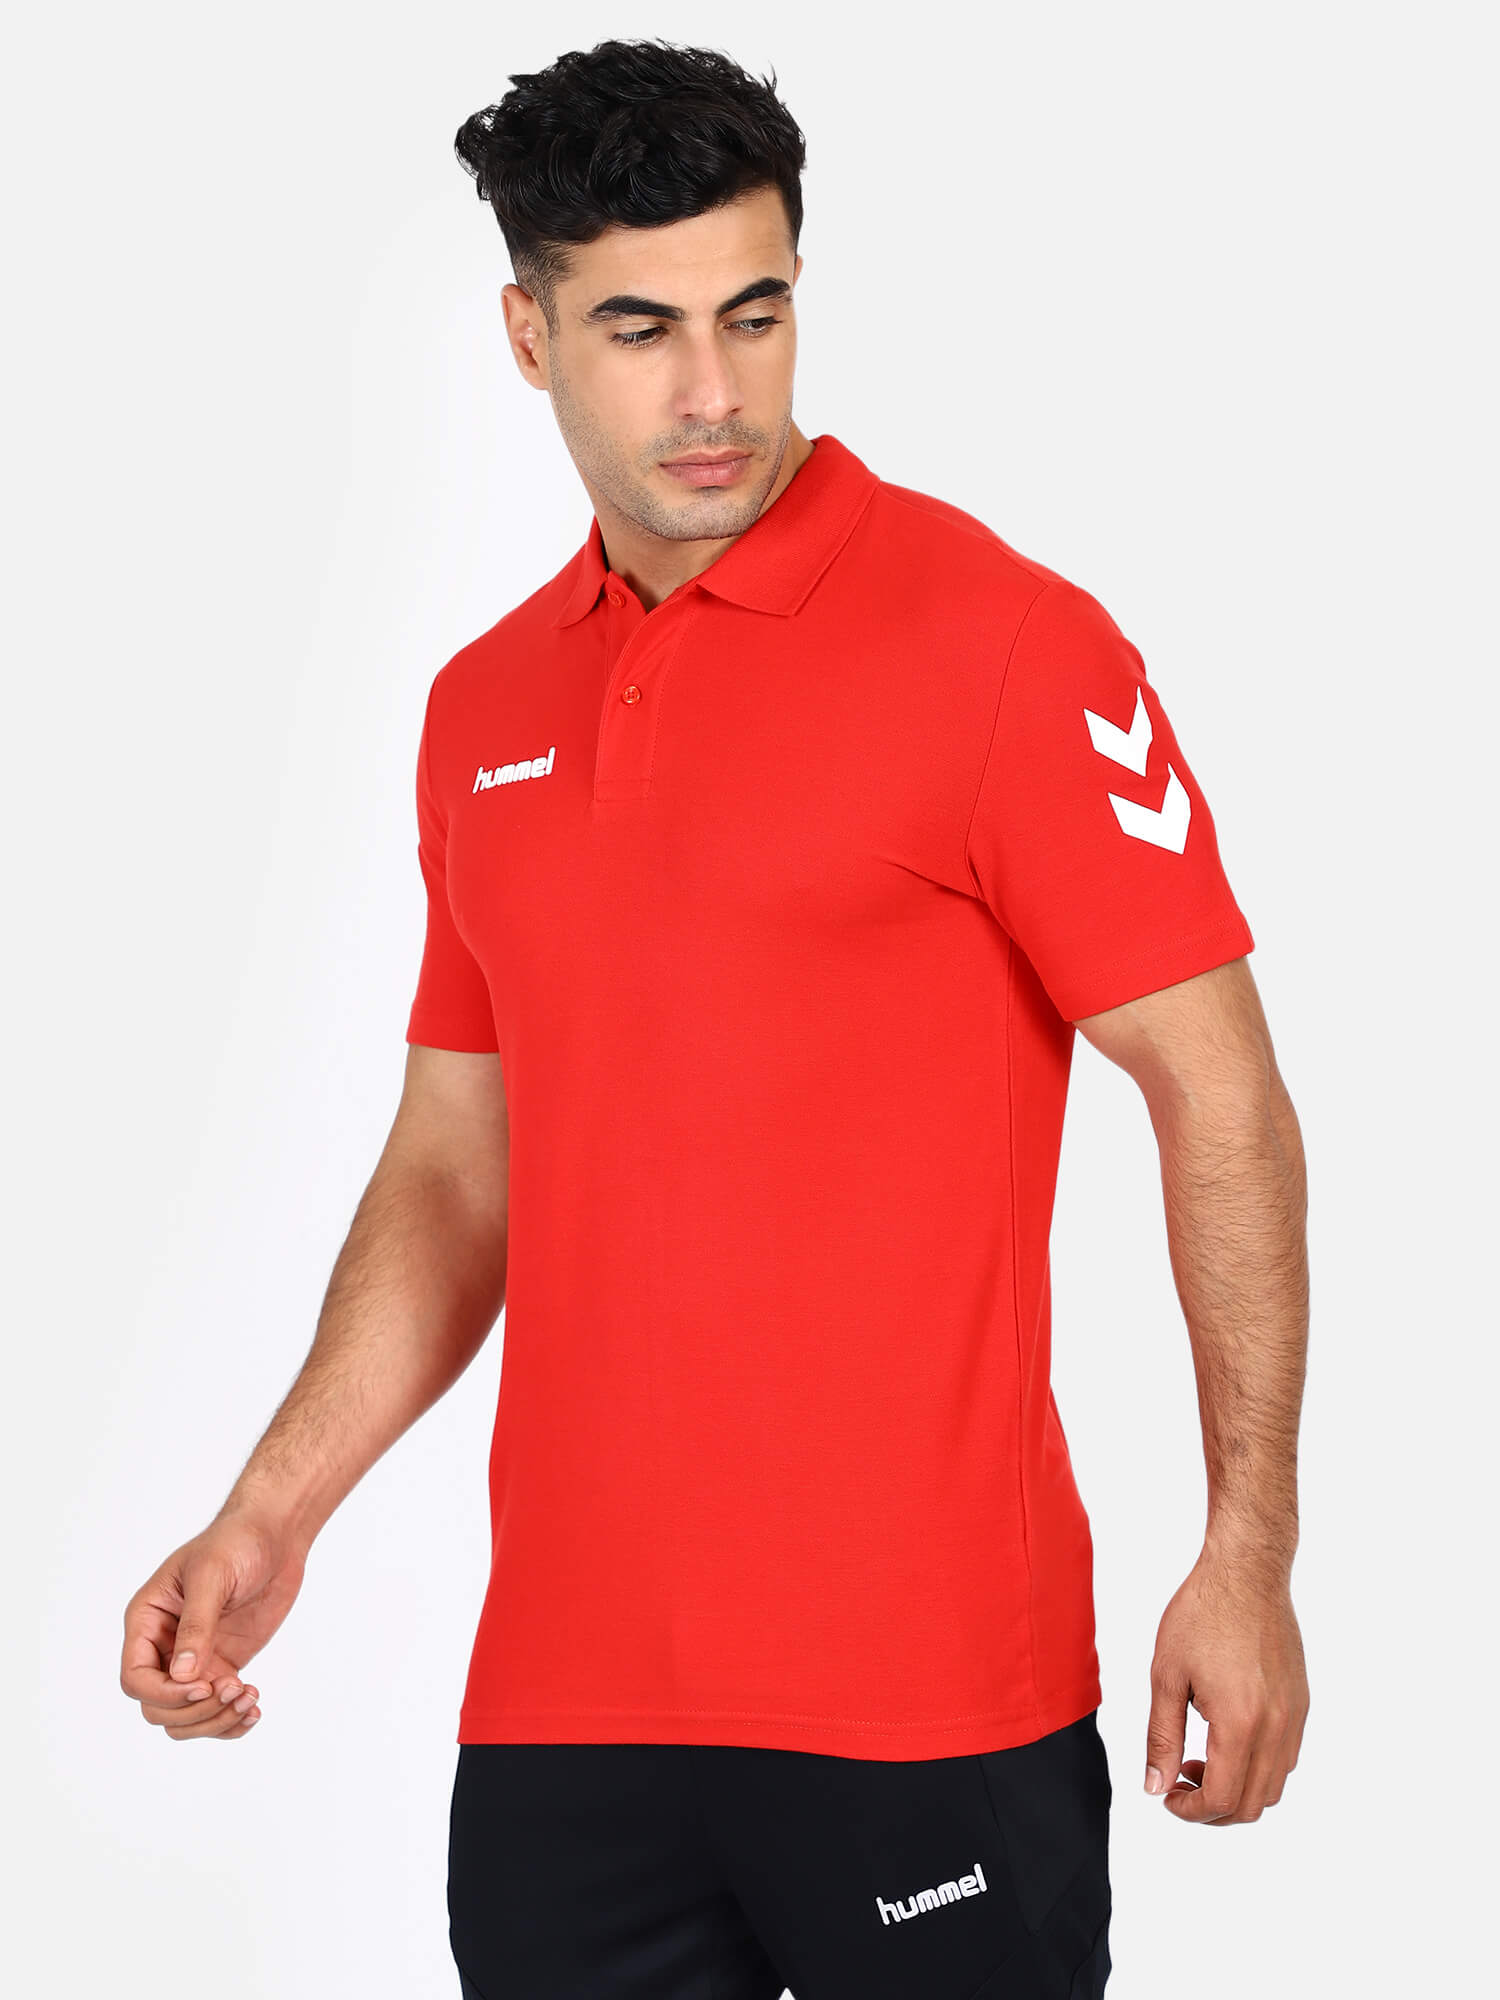 Go Cotton Polo Red T-Shirts for Men